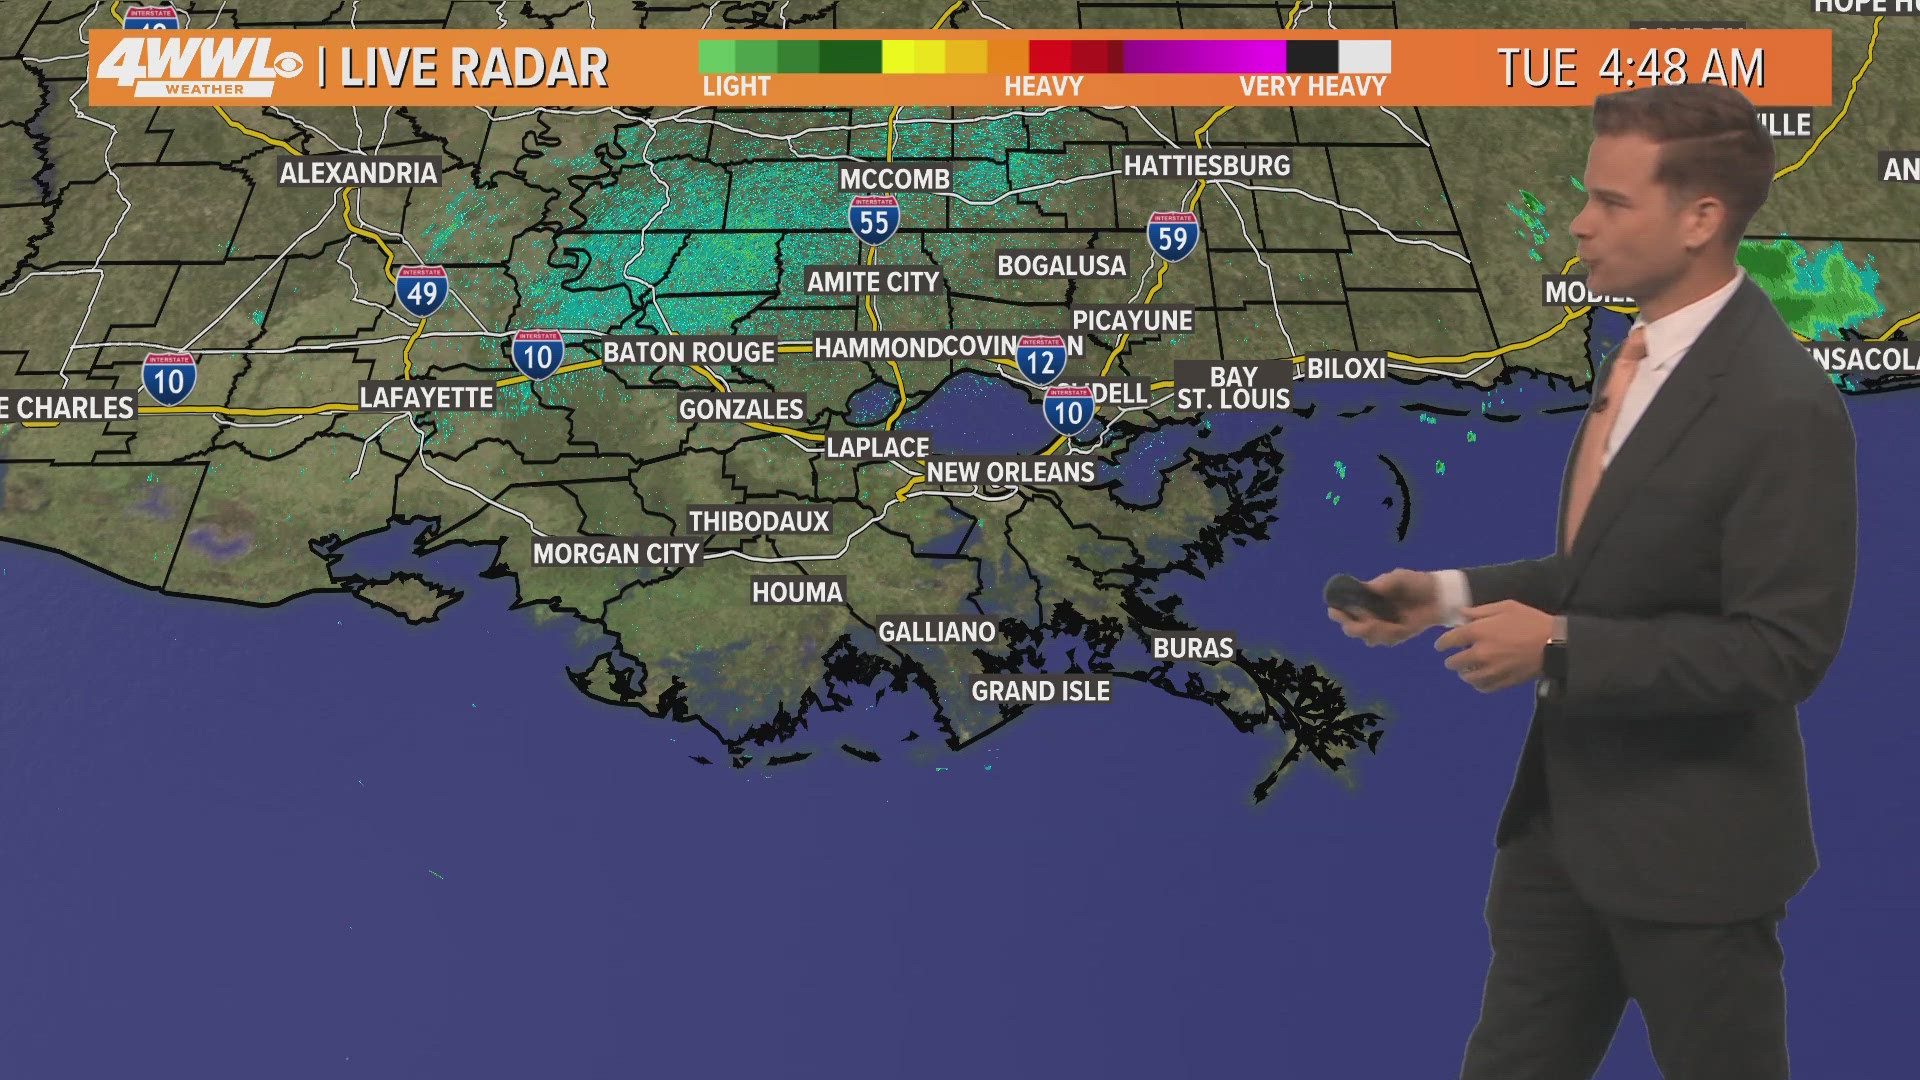 Meteorologist Payton Malone says our next chance for rain arrives Friday.